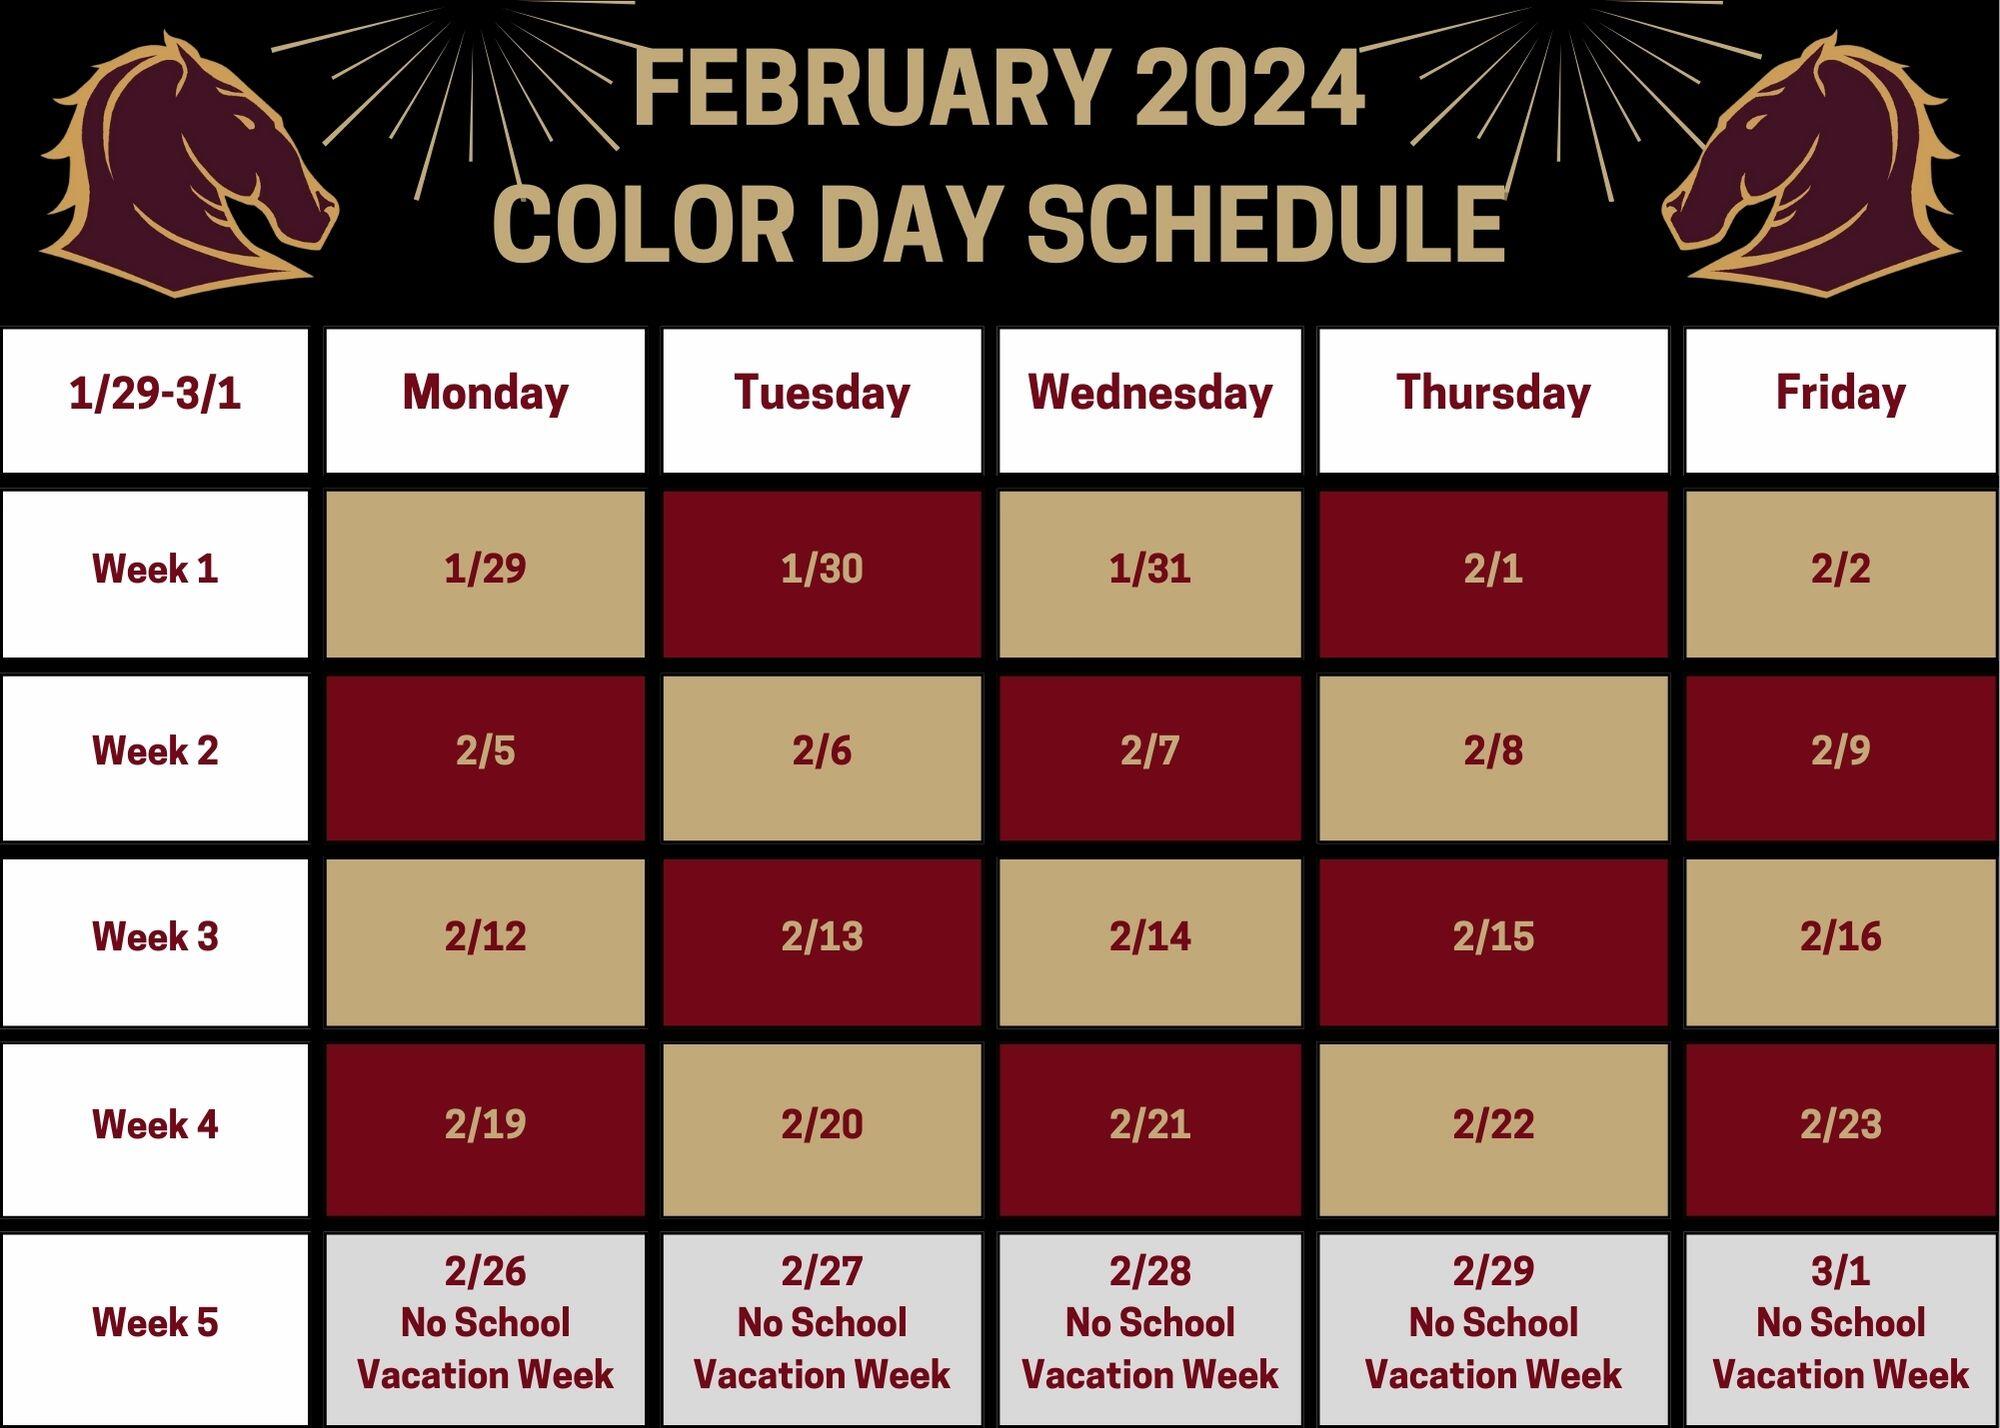 February 2024 Color Day Calendar, Alternating maroon and gold days.